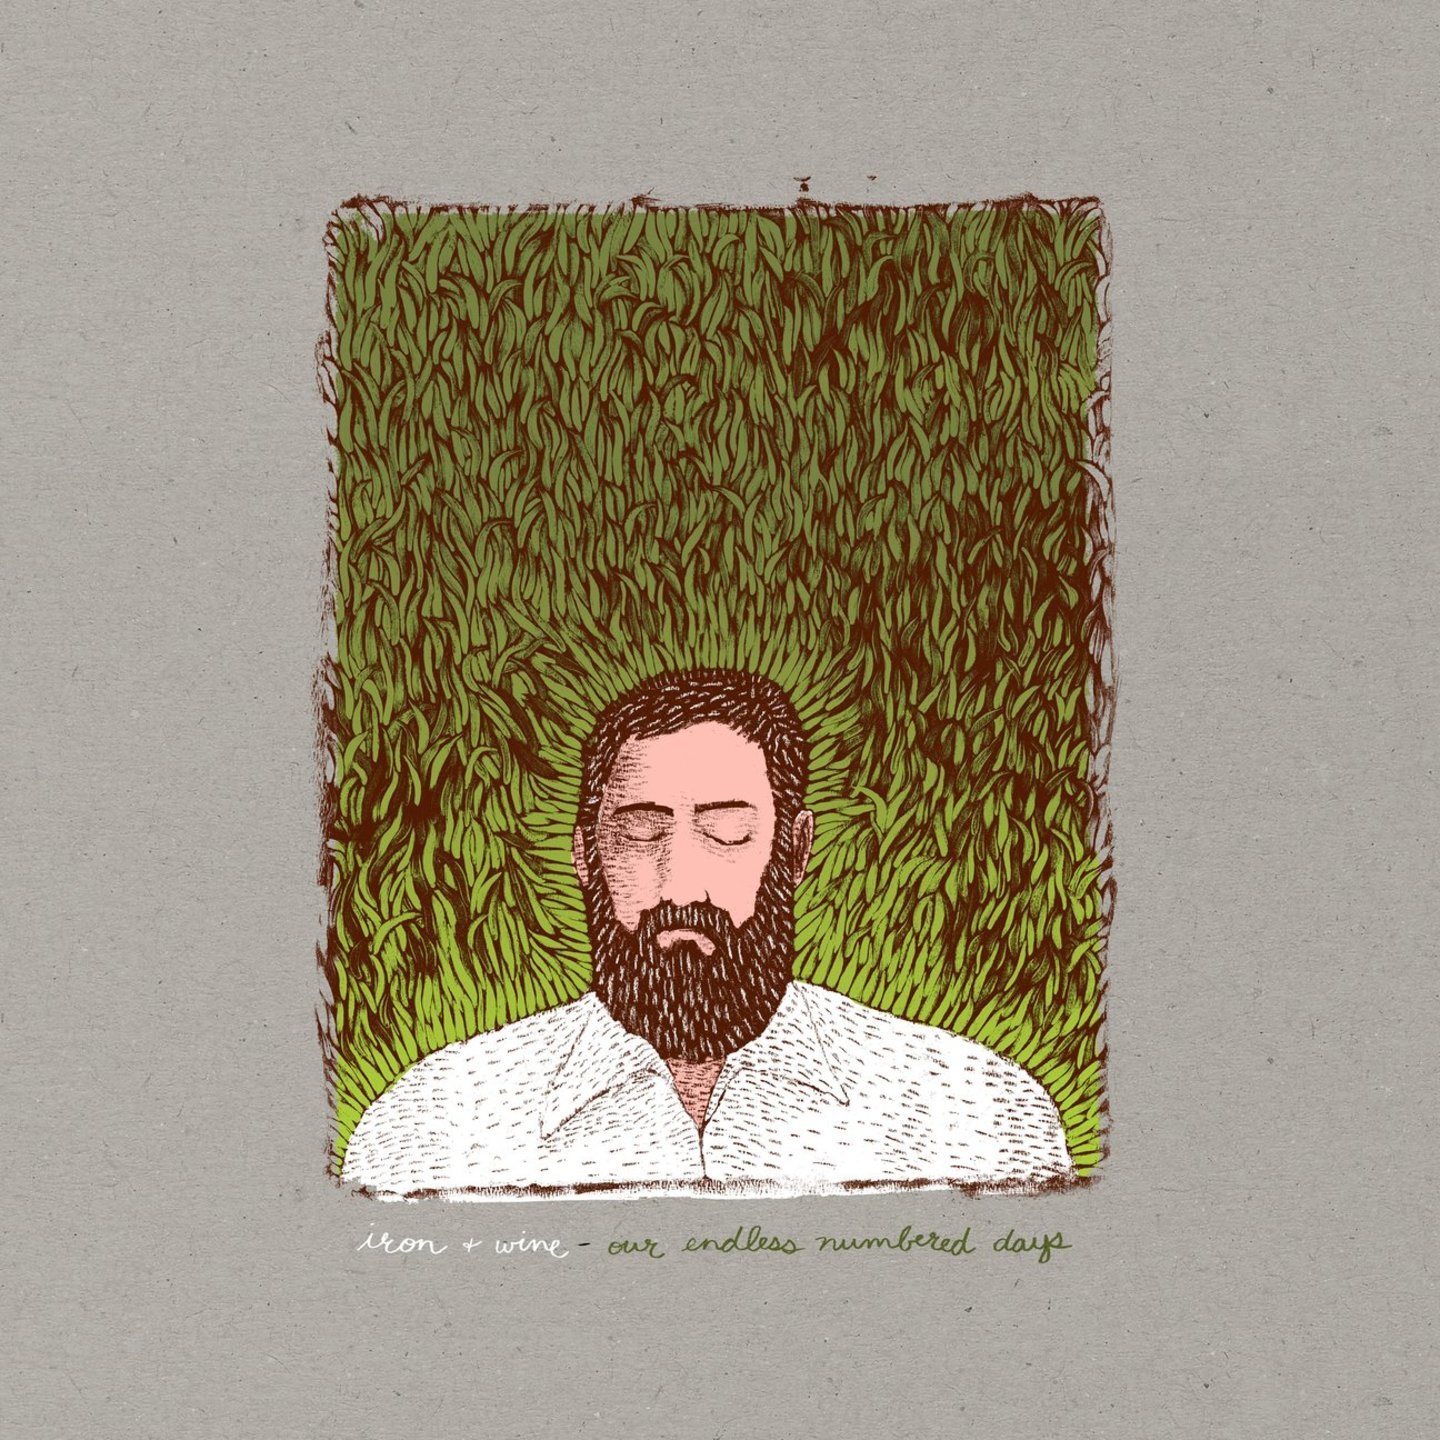 IRON & WINE - Our Endless Numbered Days Deluxe Edition 2xLP